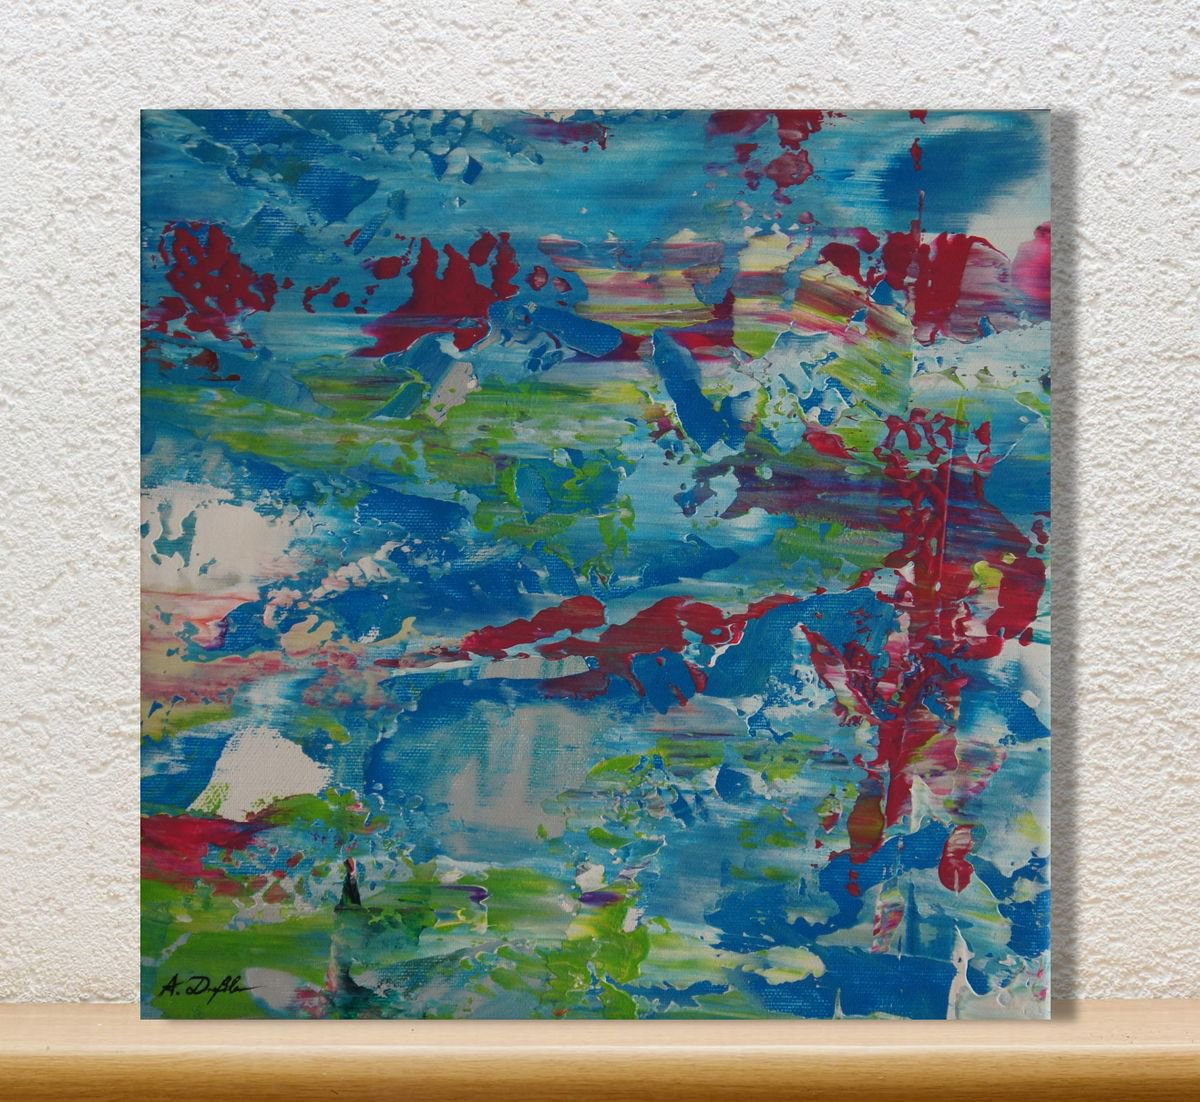 A Square Foot On The Richter Scale I (30 x 30 cm) (12 x 12 inches) by Ansgar Dressler